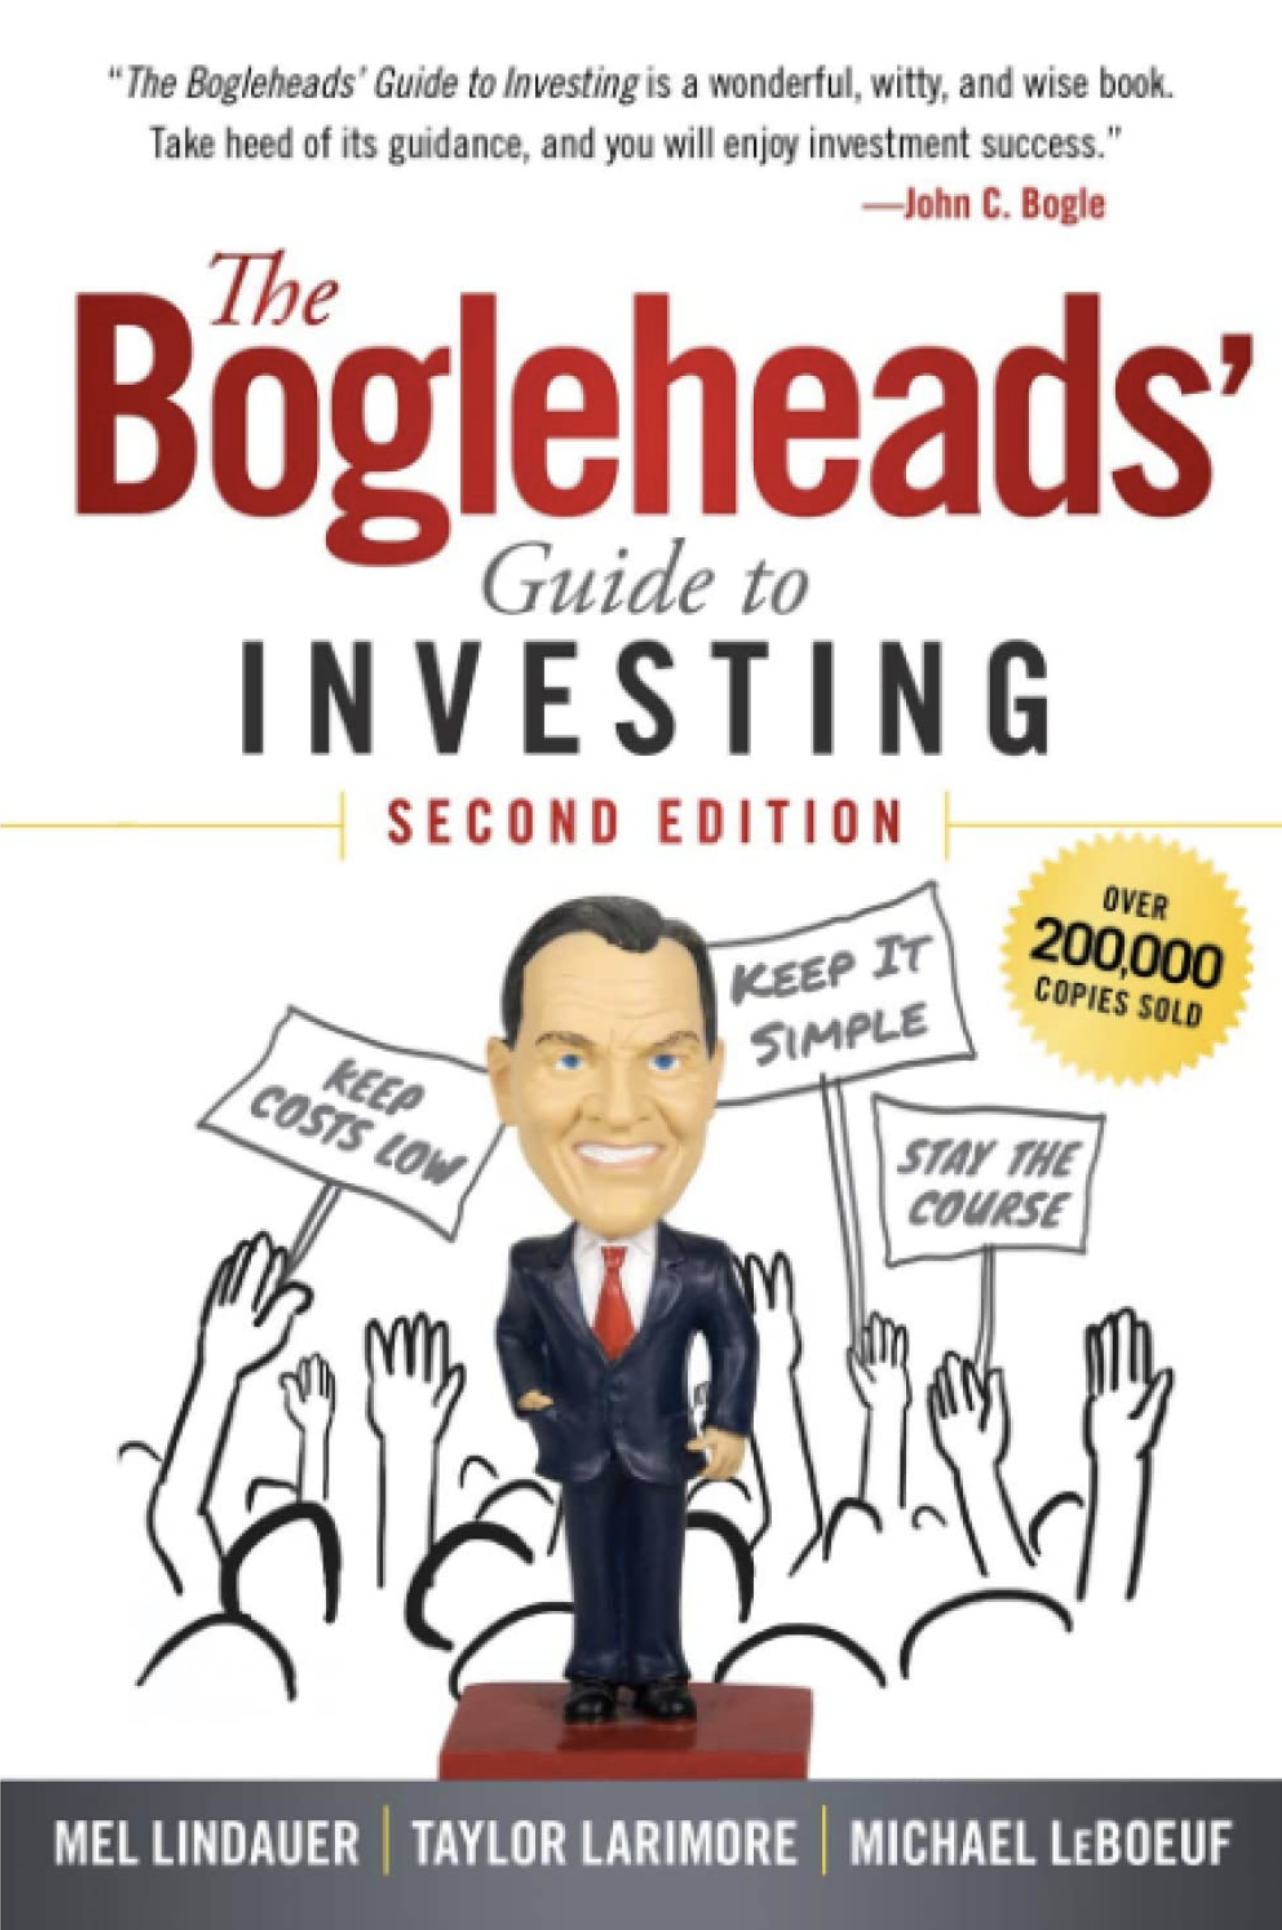 The Bogleheads' Guide to Investing by Mel Lindauer, Taylor Larimore and Michael LeBoueuf